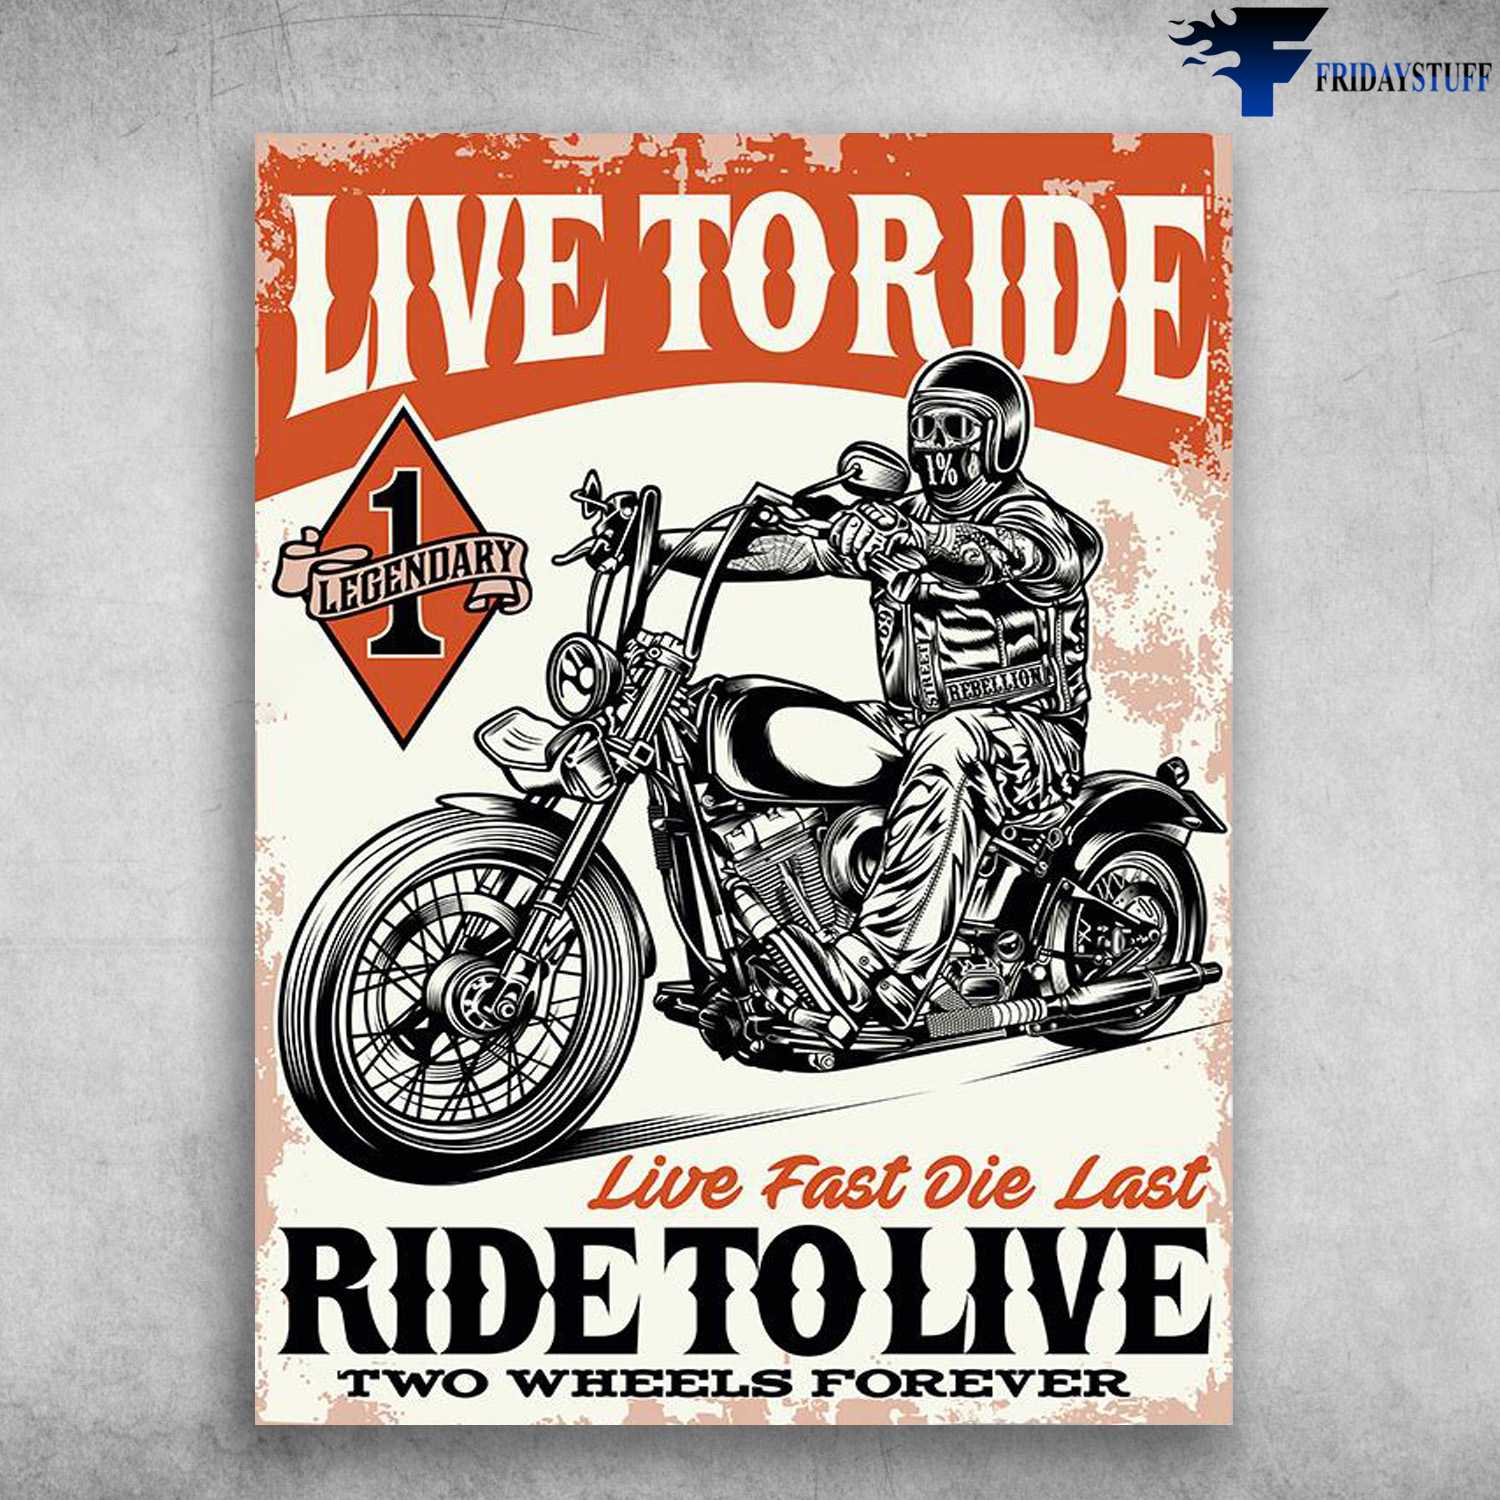 Motorbike Lover, Motorcycle Man - Live To Ride, Live Fast Die Last, Ride To Live, Two Wheels Forever